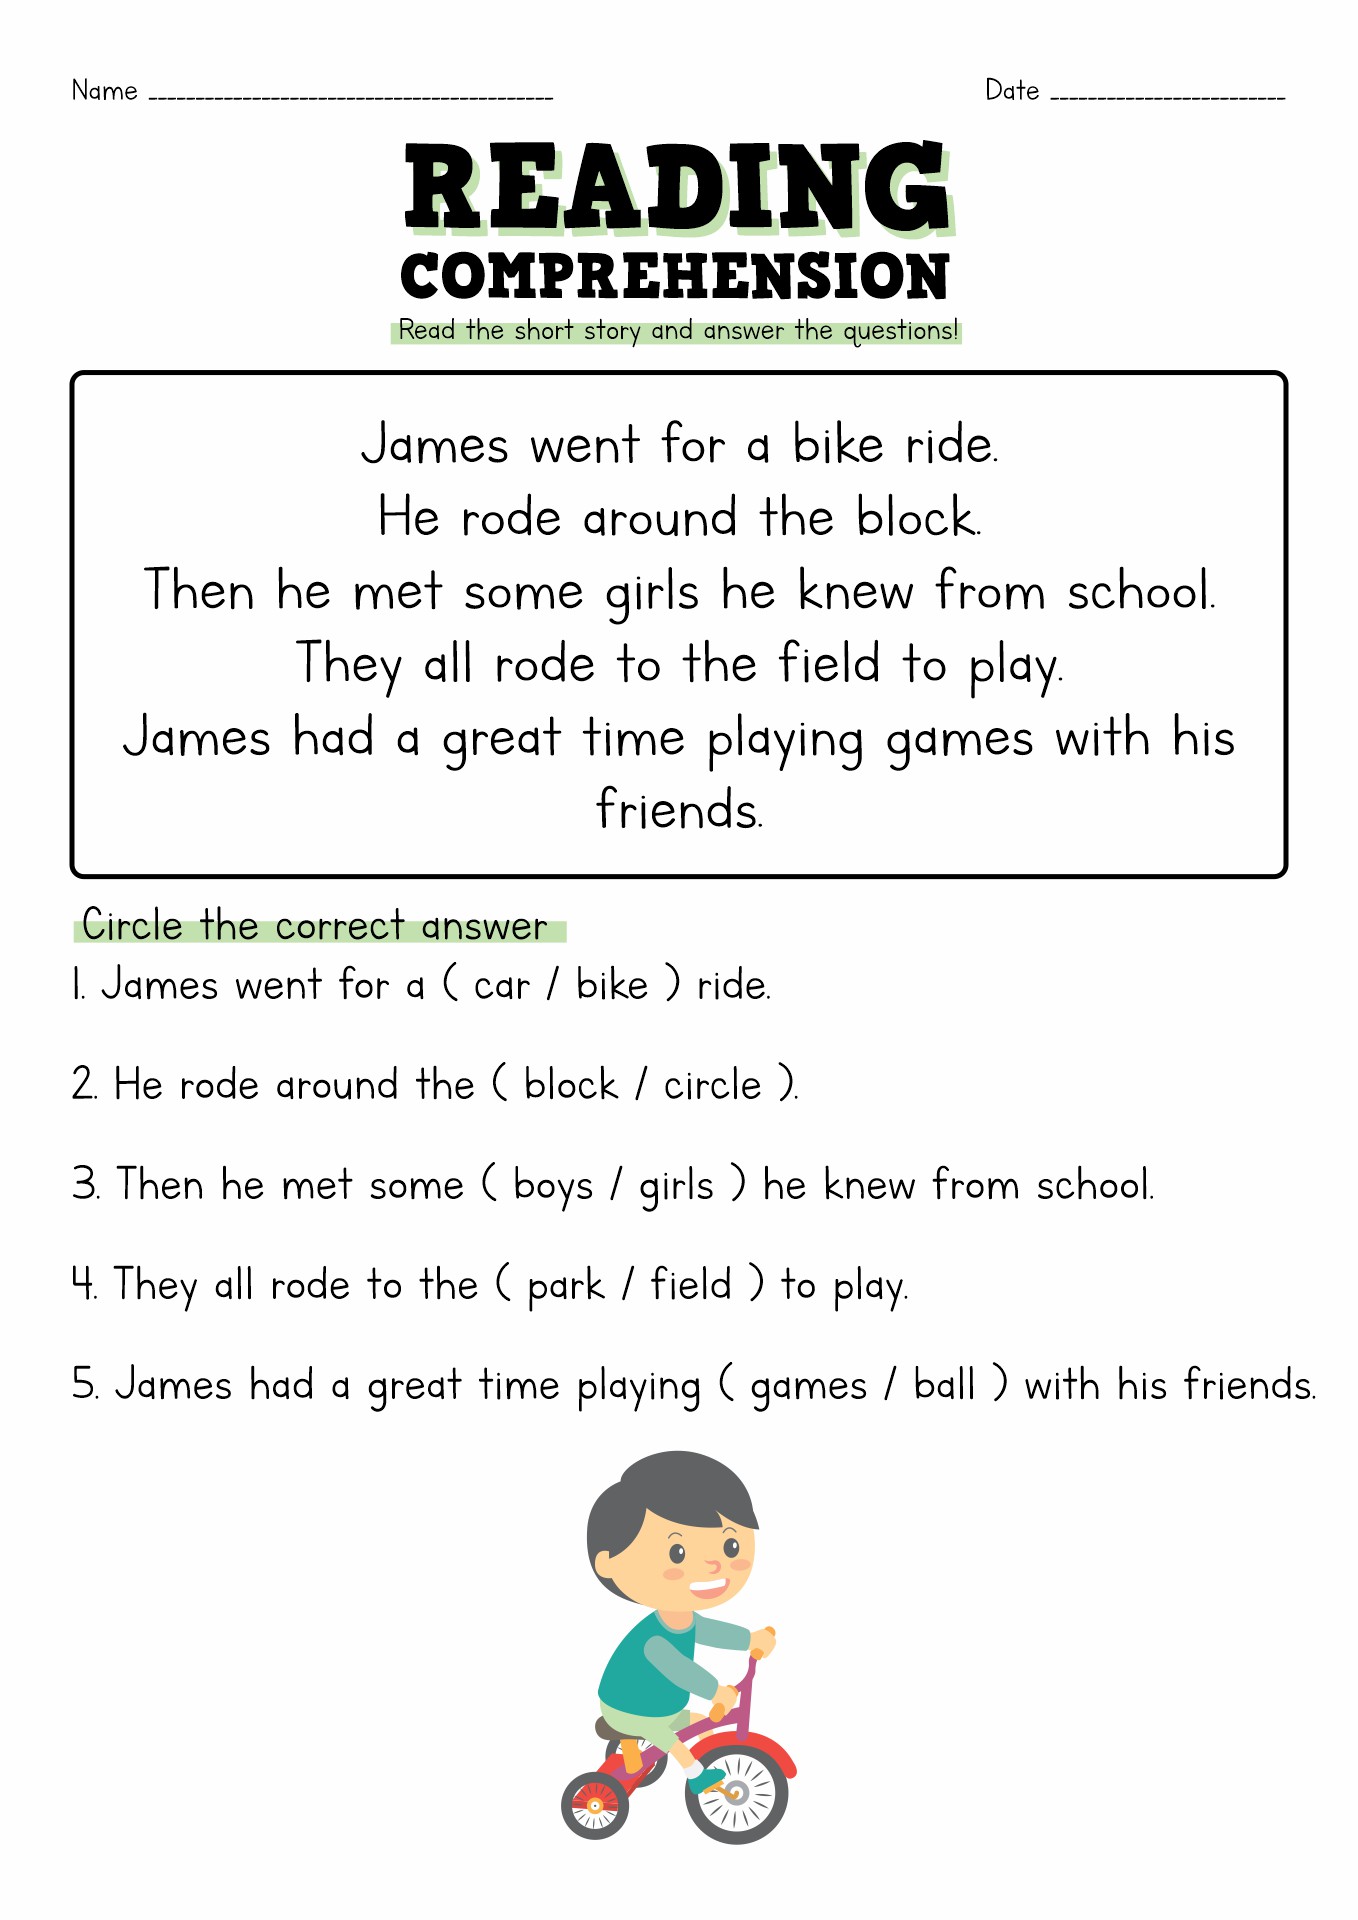 Short Story with Questions Worksheets Image